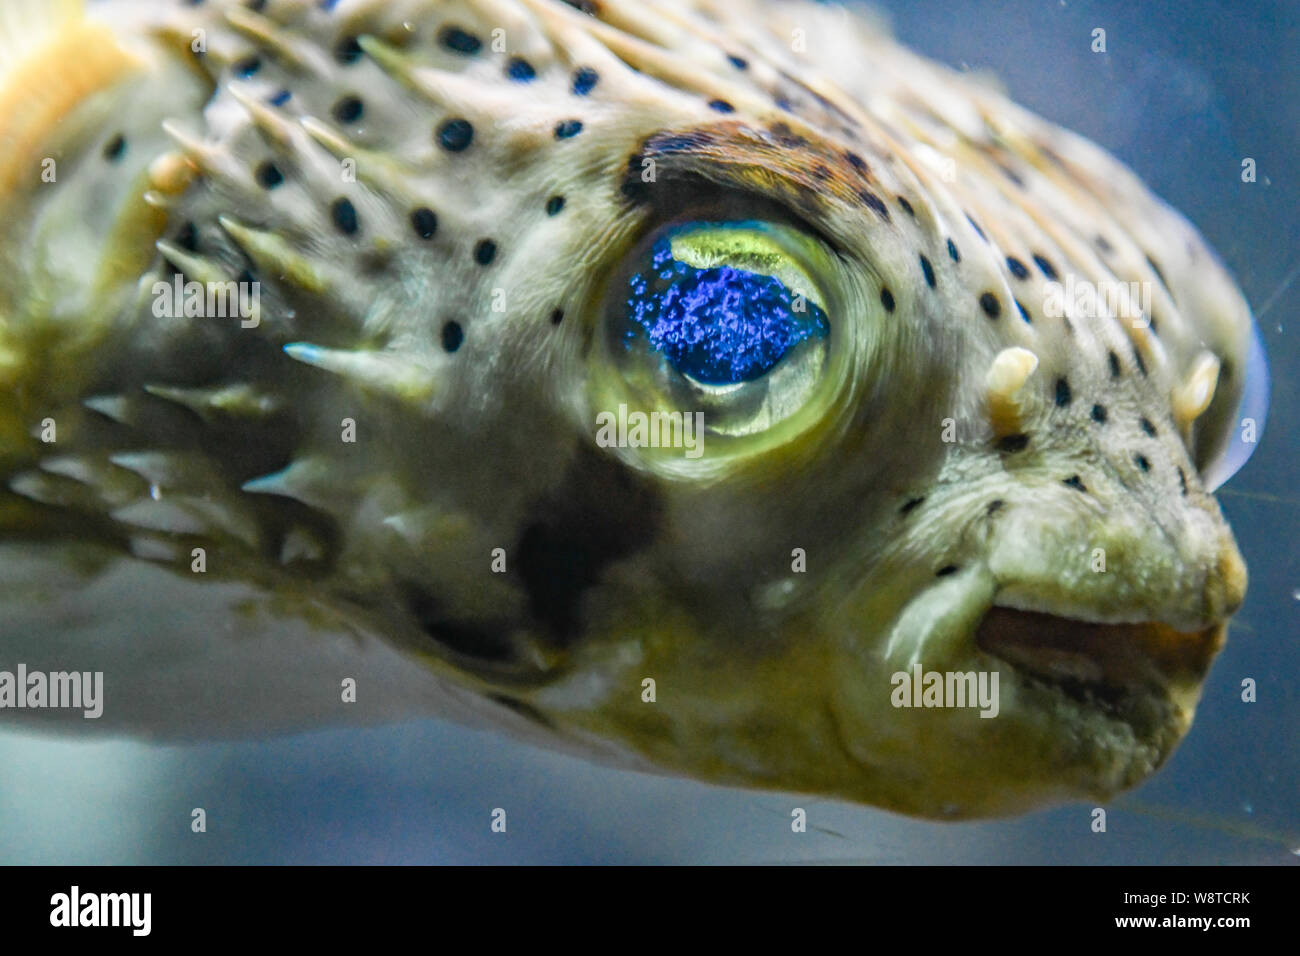 Porcupine Puffer fish Diodon holocanthus Bermuda Aquarium, Museum and Zoo - Pufferfish closeup with fluorescent blue eyes - salt water tropical fish Stock Photo